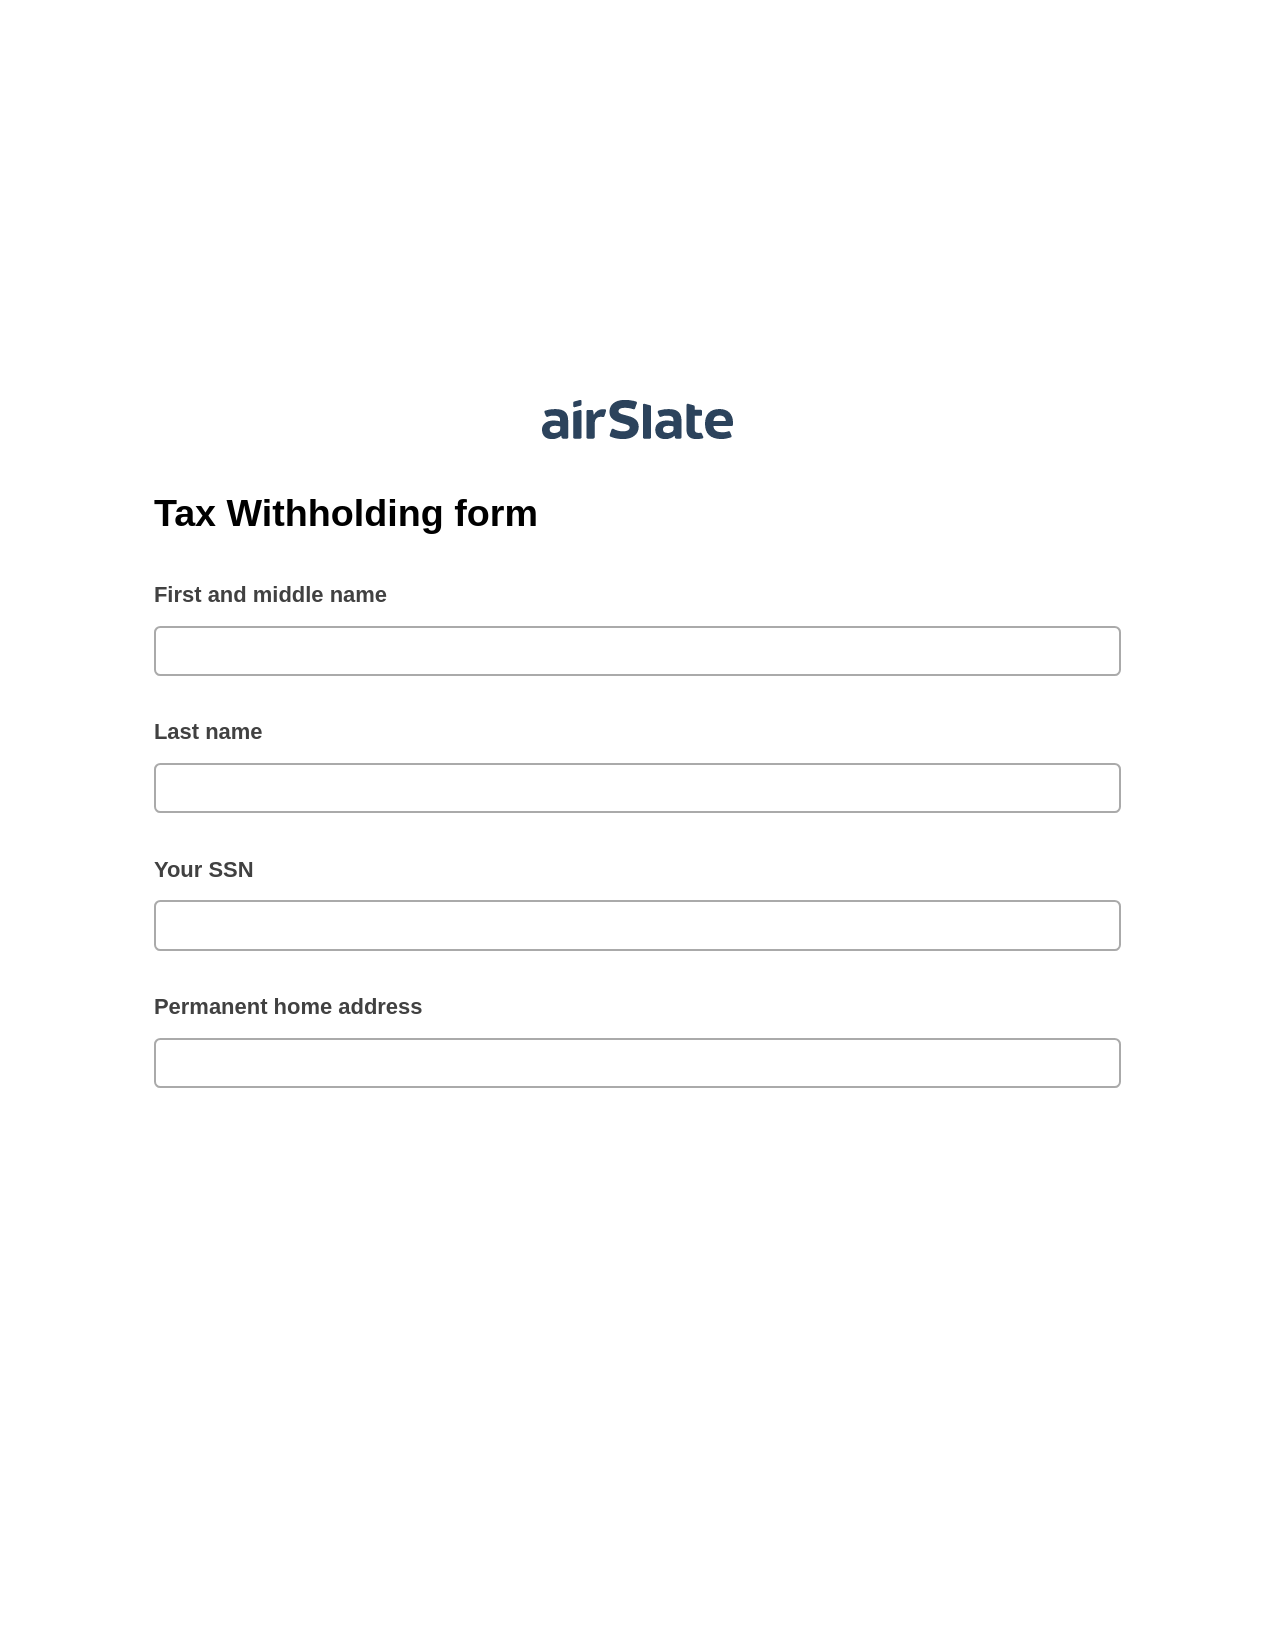 Multirole Tax Withholding form Pre-fill from Salesforce Records via SOQL Bot, Revoke Access Bot, Box Bot